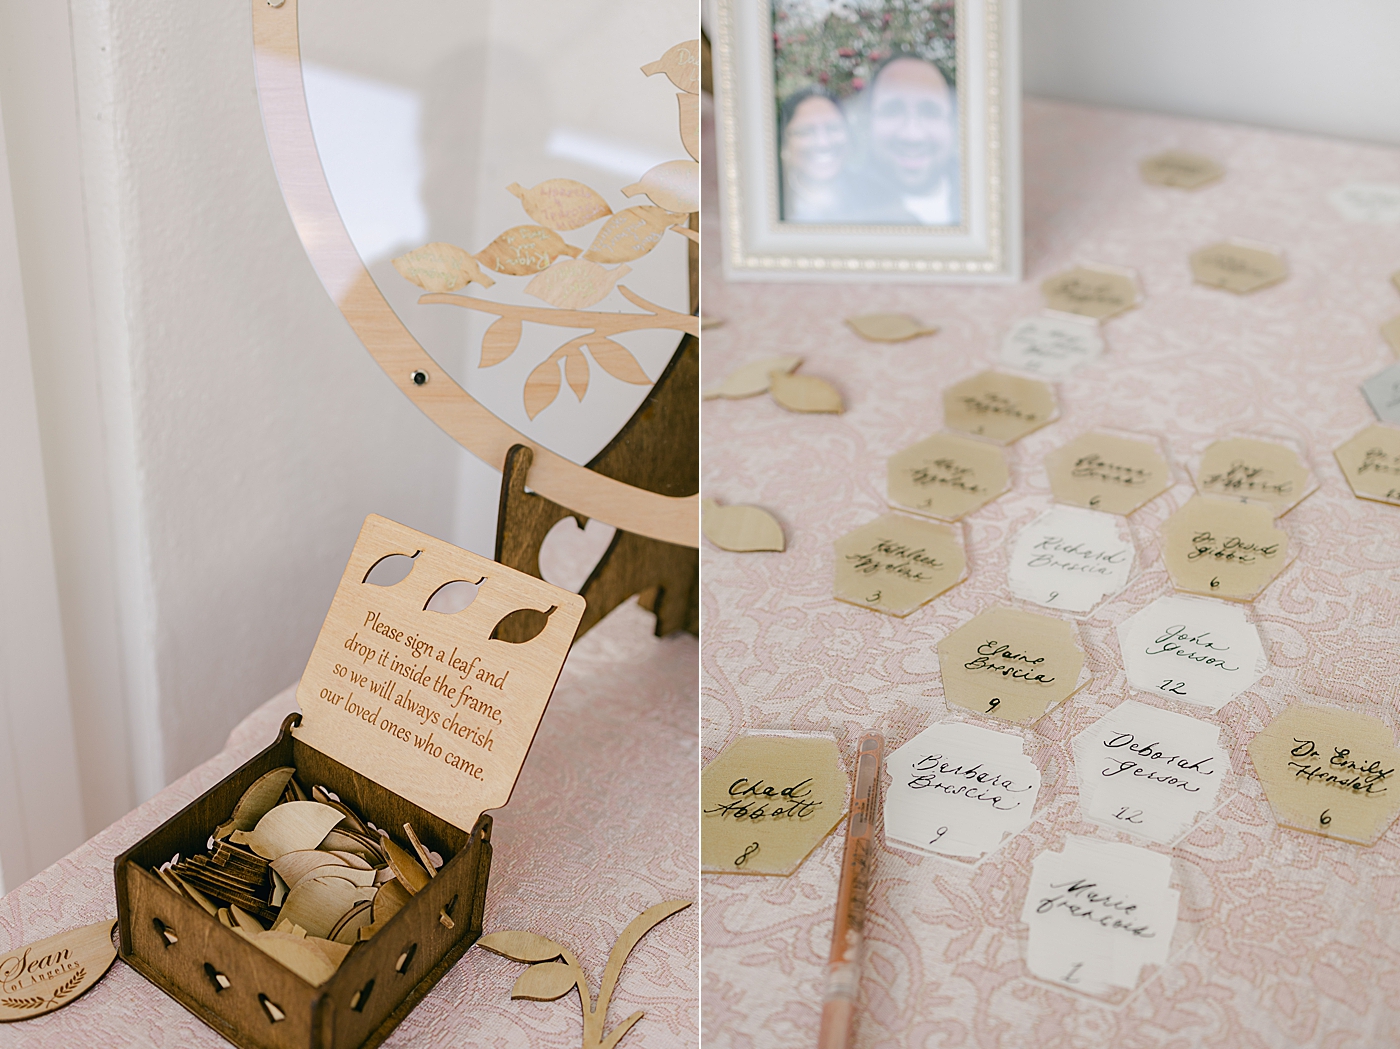 Reception place card details during Sagamore Wedding | Image by Hope Helmuth Photography